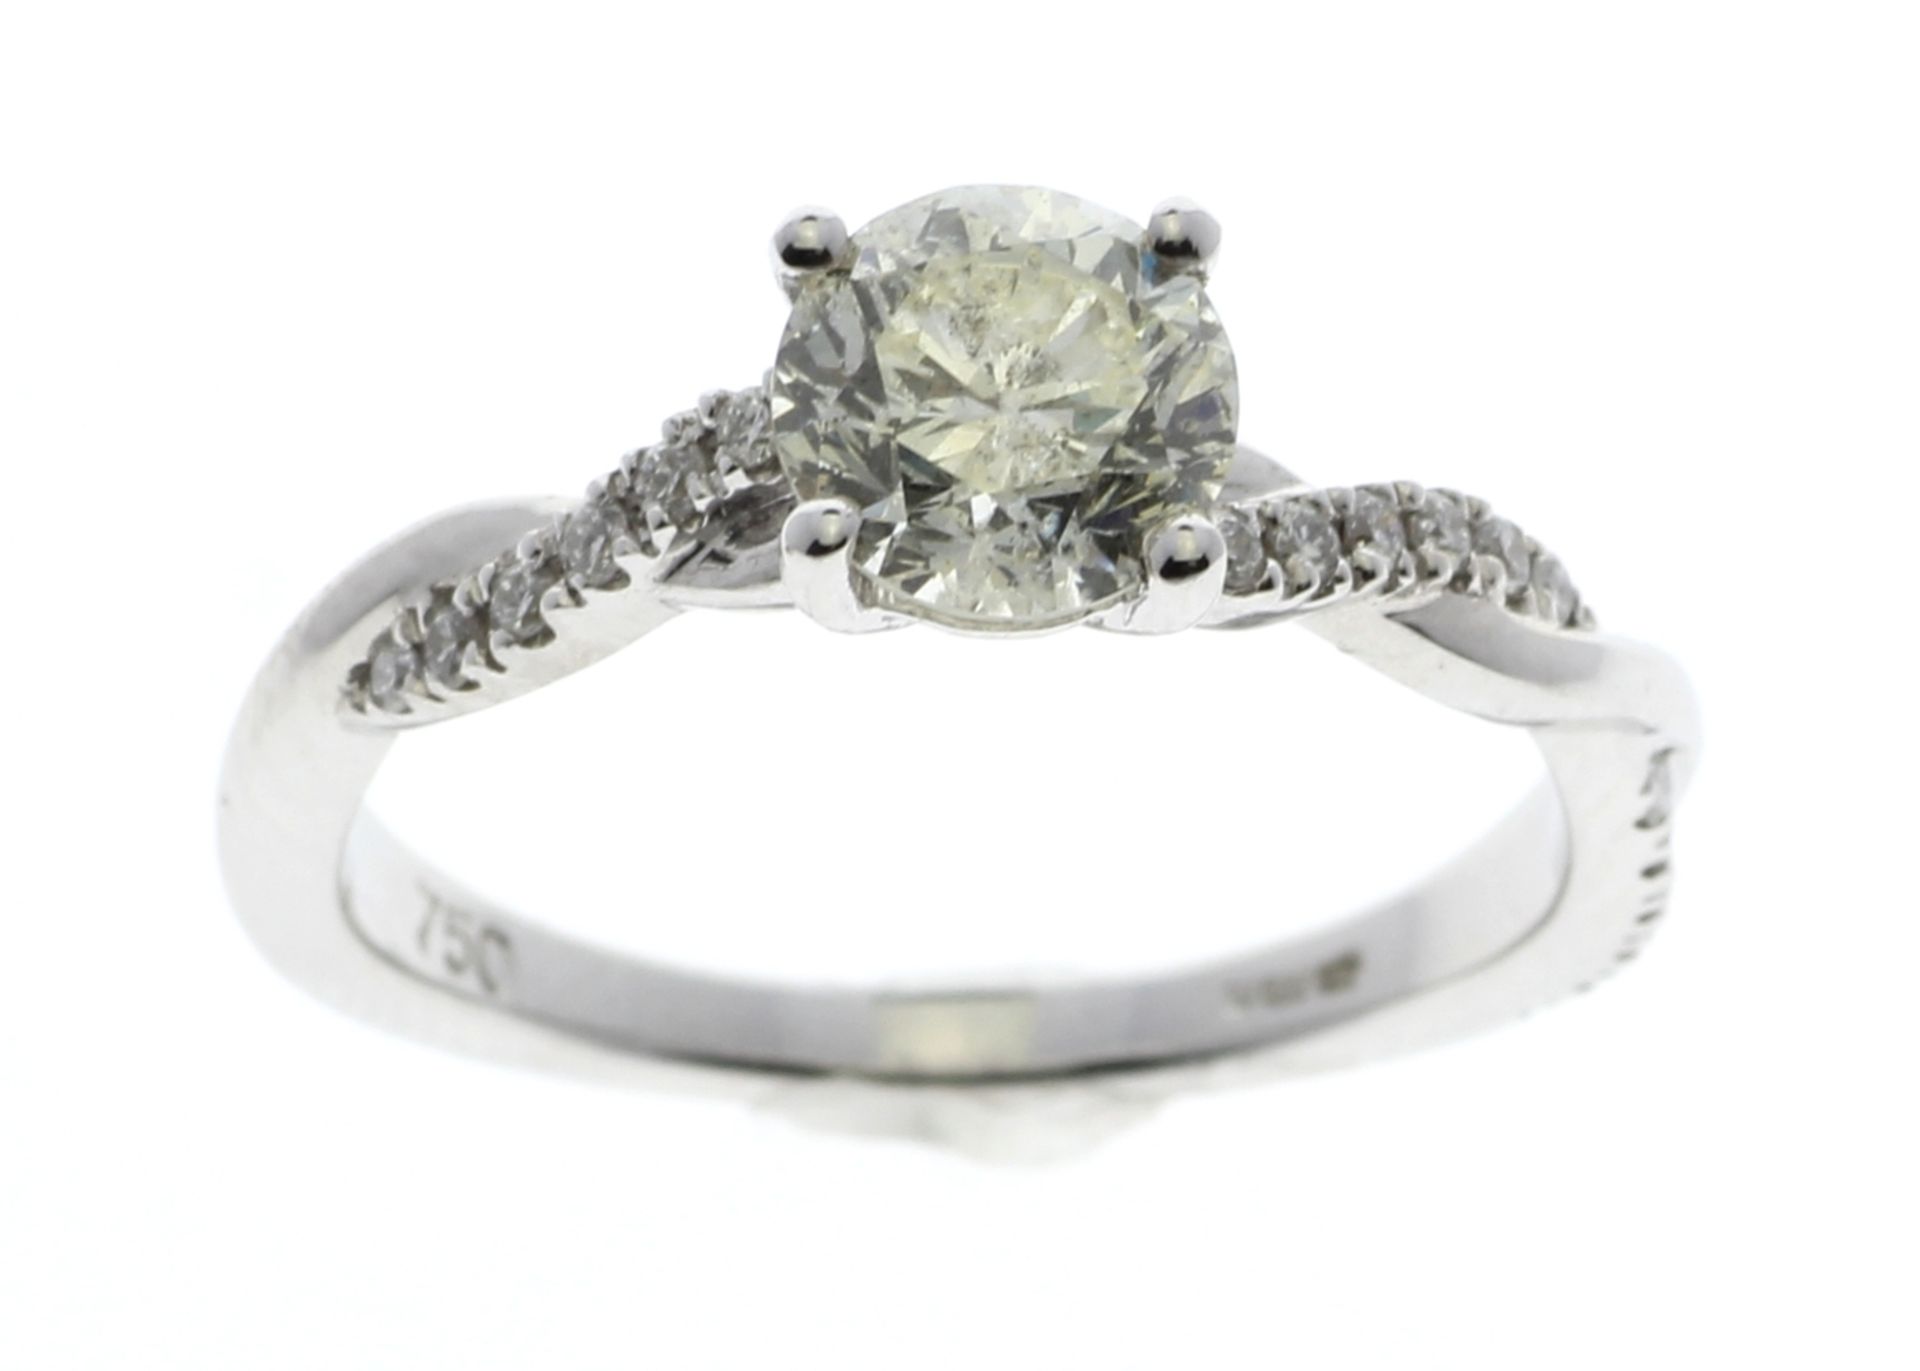 18ct White Gold Diamond Ring With Waved Stone Set Shoulders 1.22 Carats - Valued By GIE £27,950.00 - - Image 5 of 6